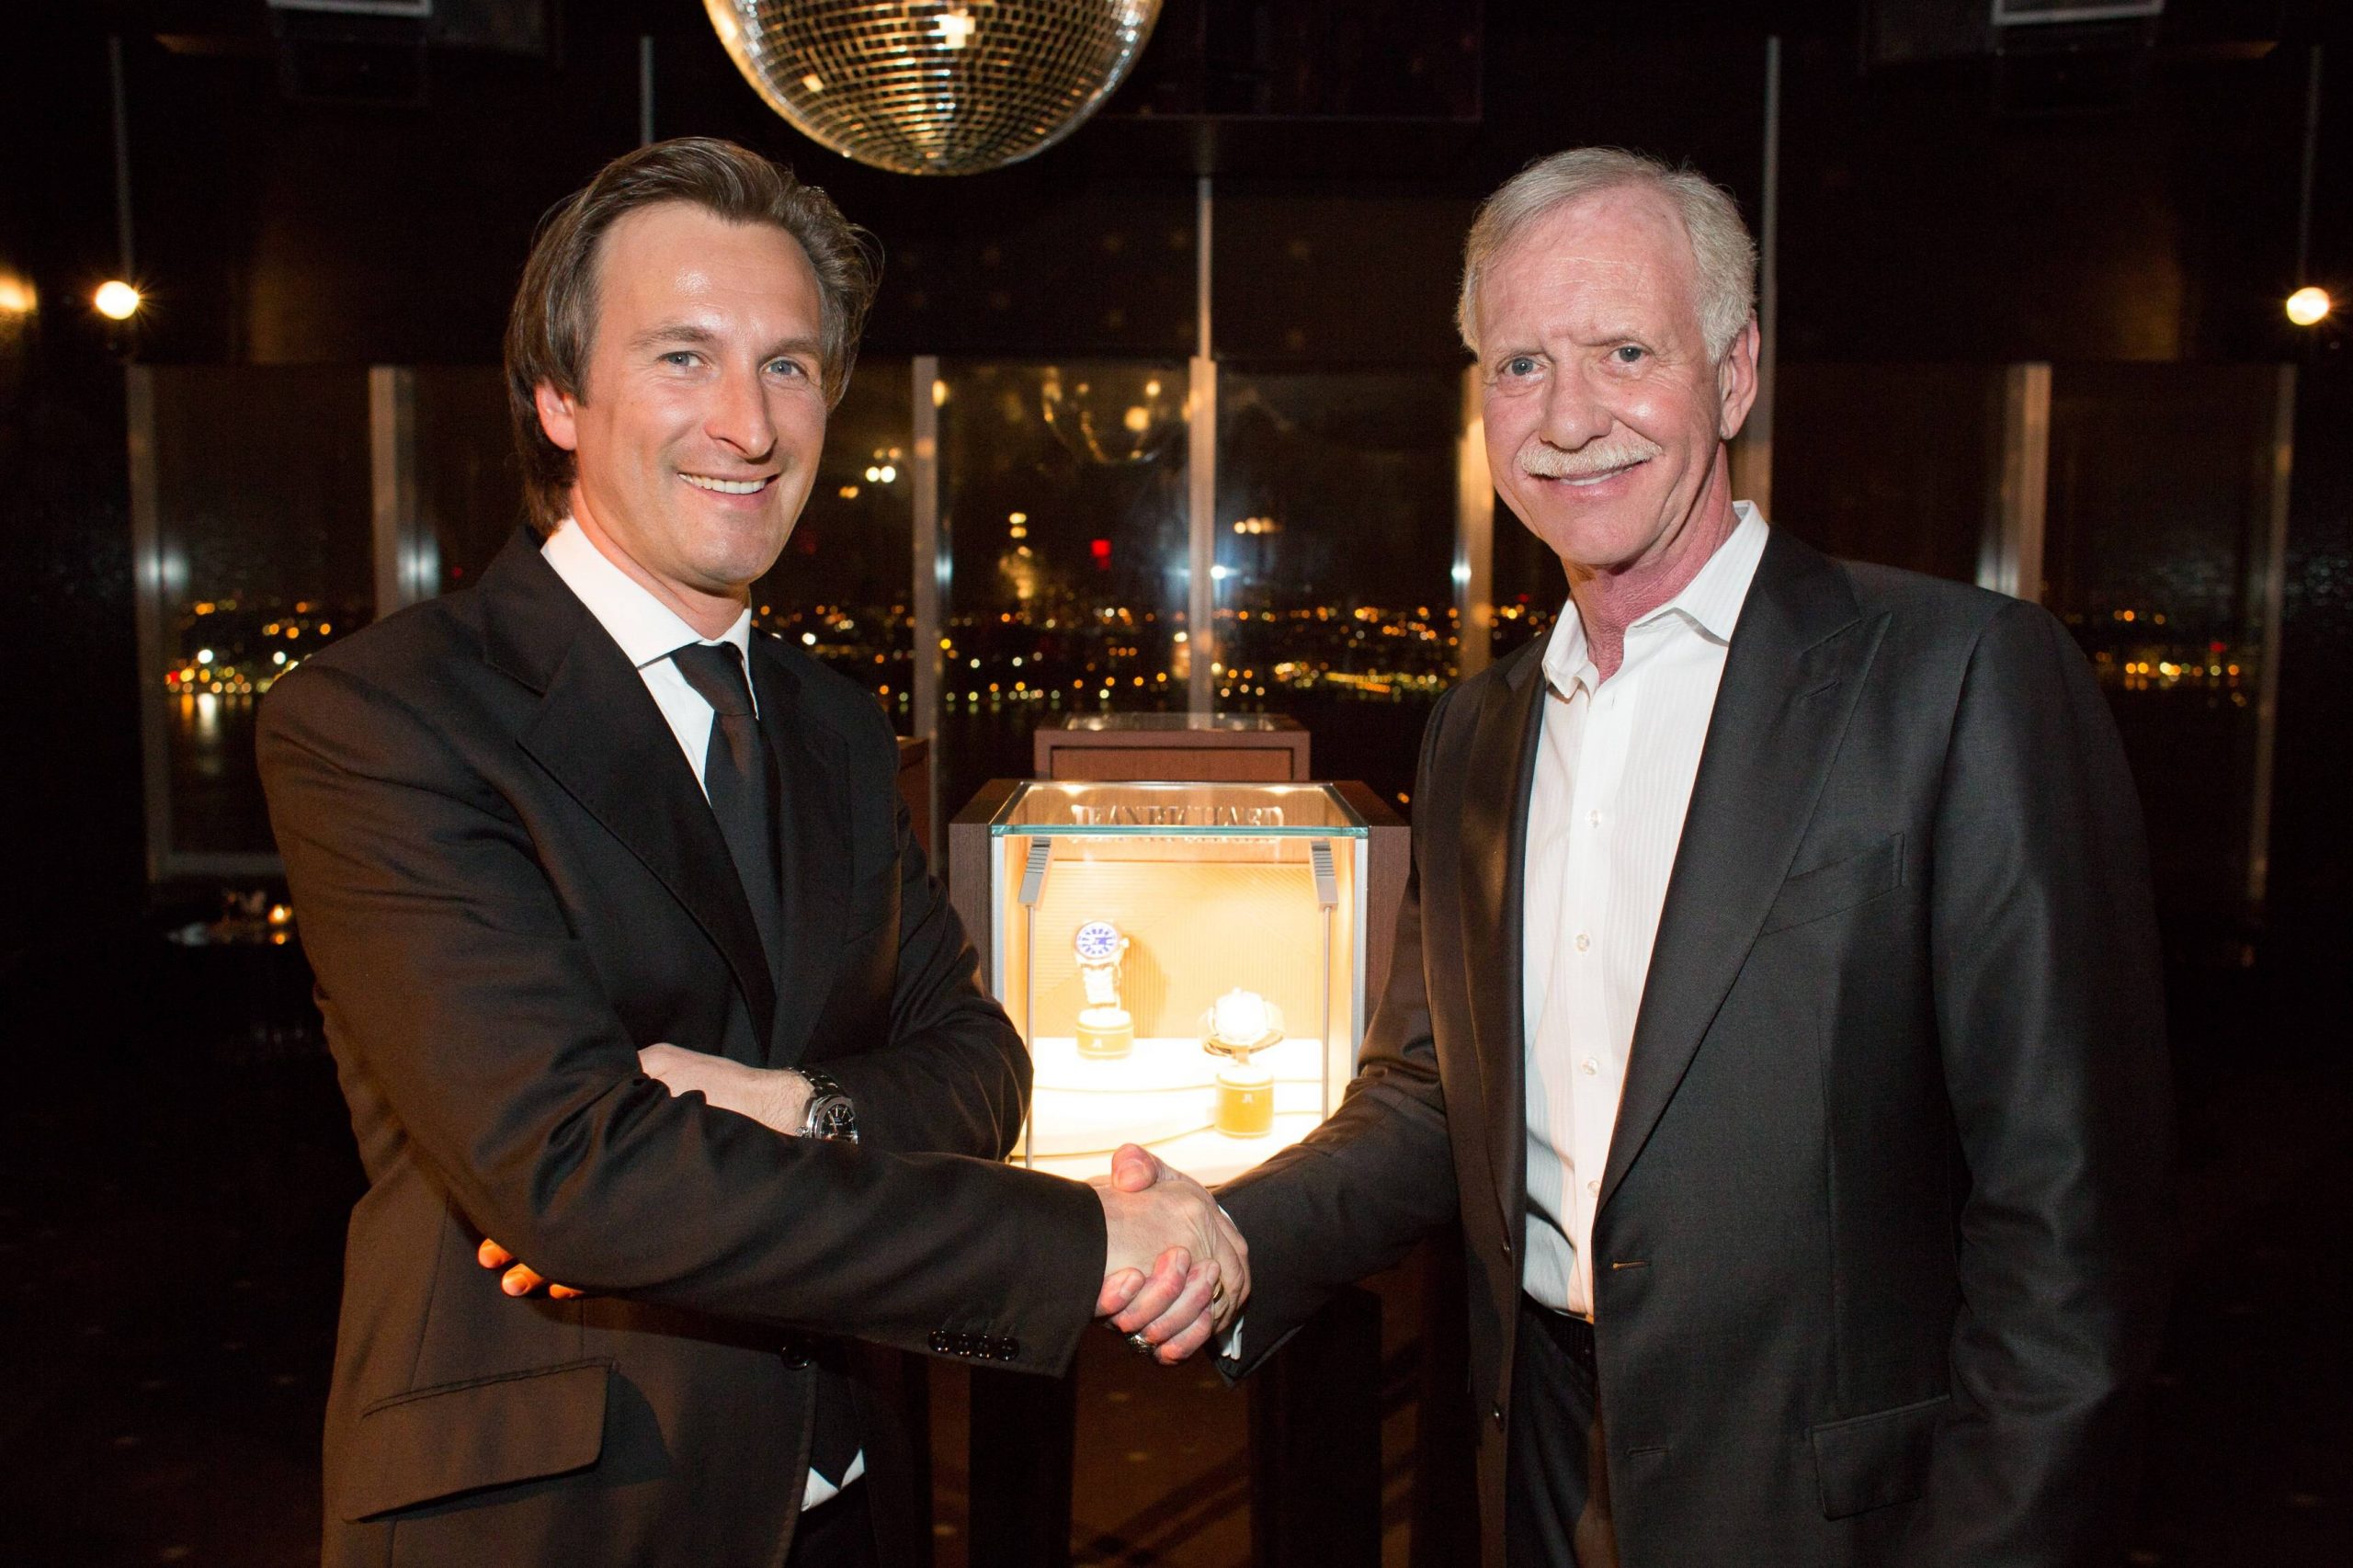 JEANRICHARD Announce Partnership With Hero Captain “Sully” Sullenberger